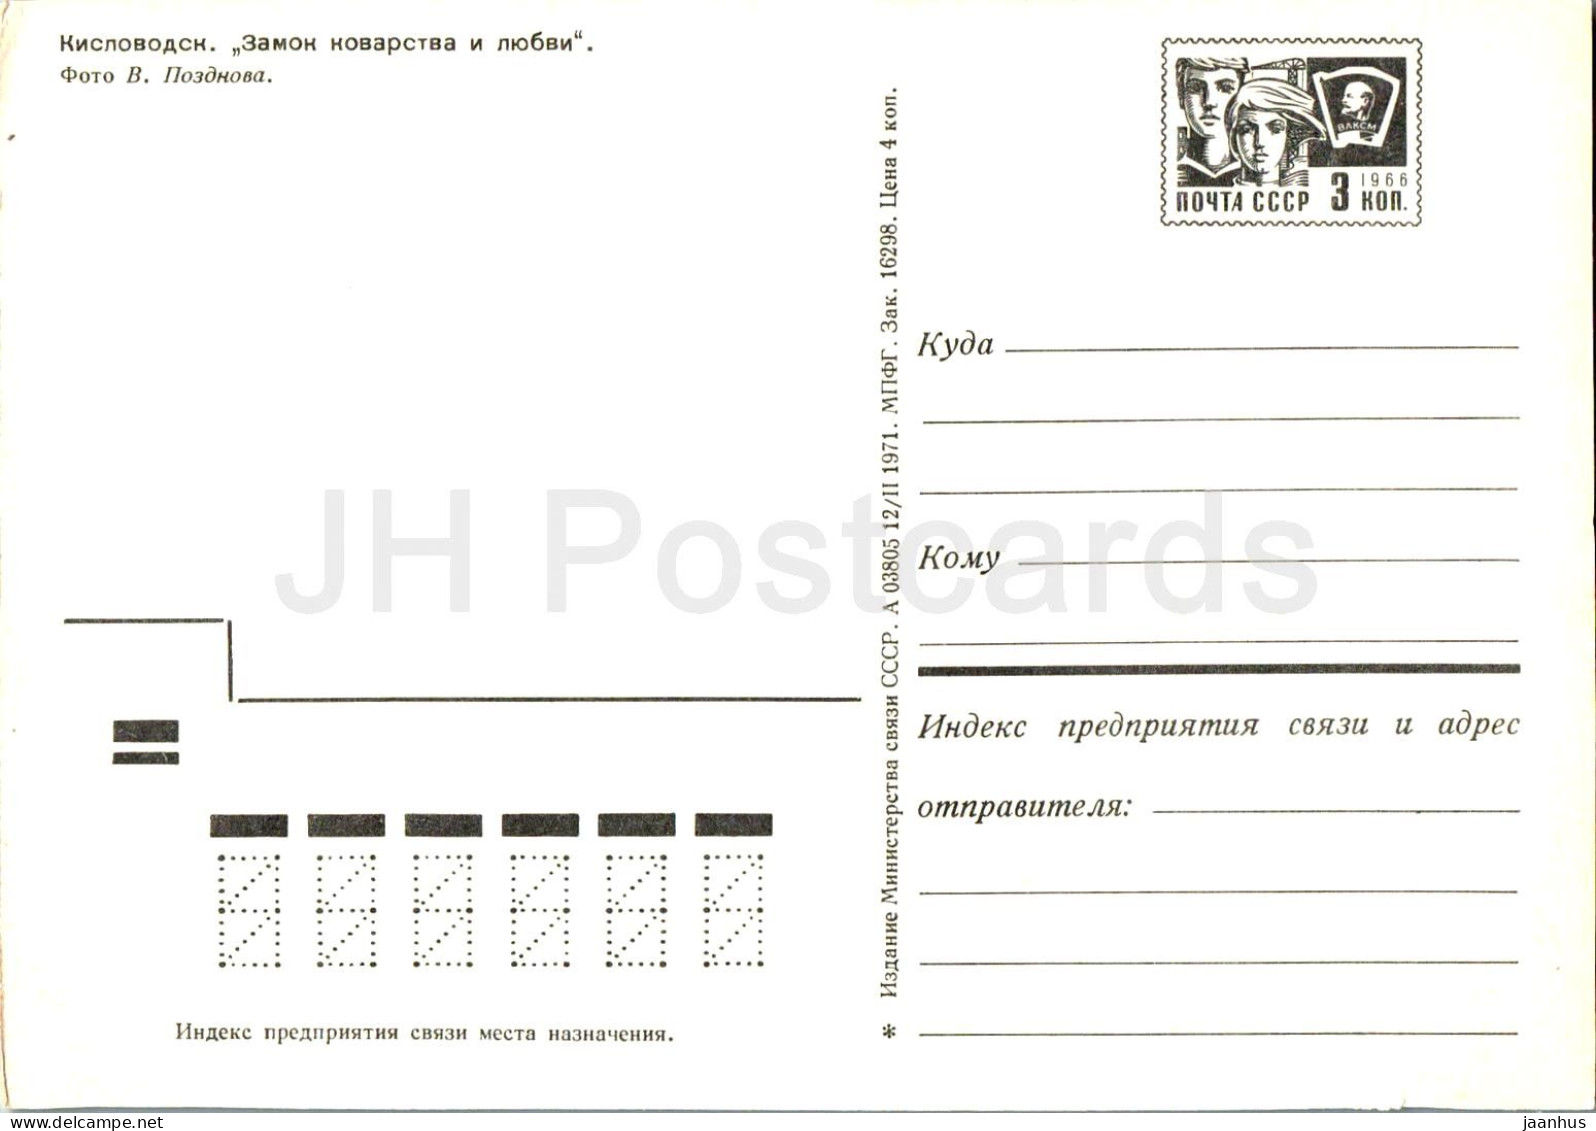 Kislovodsk - Castle Of Cunning And Love - Postal Stationery - 1971 - Russia USSR - Unused - Rusland